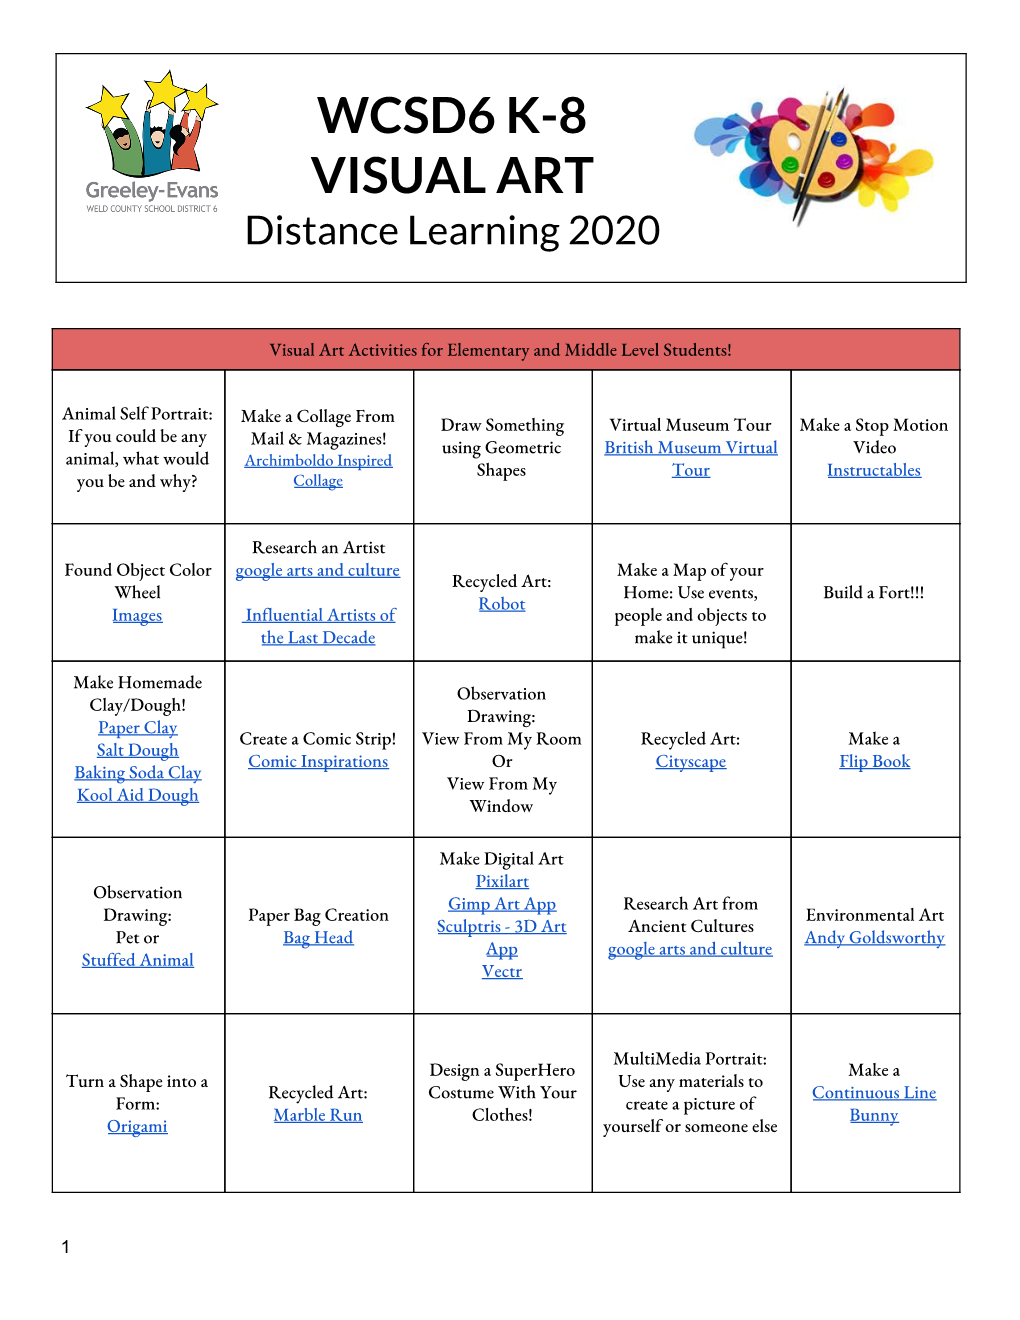 WCSD6 K-8 VISUAL ART Distance Learning 2020